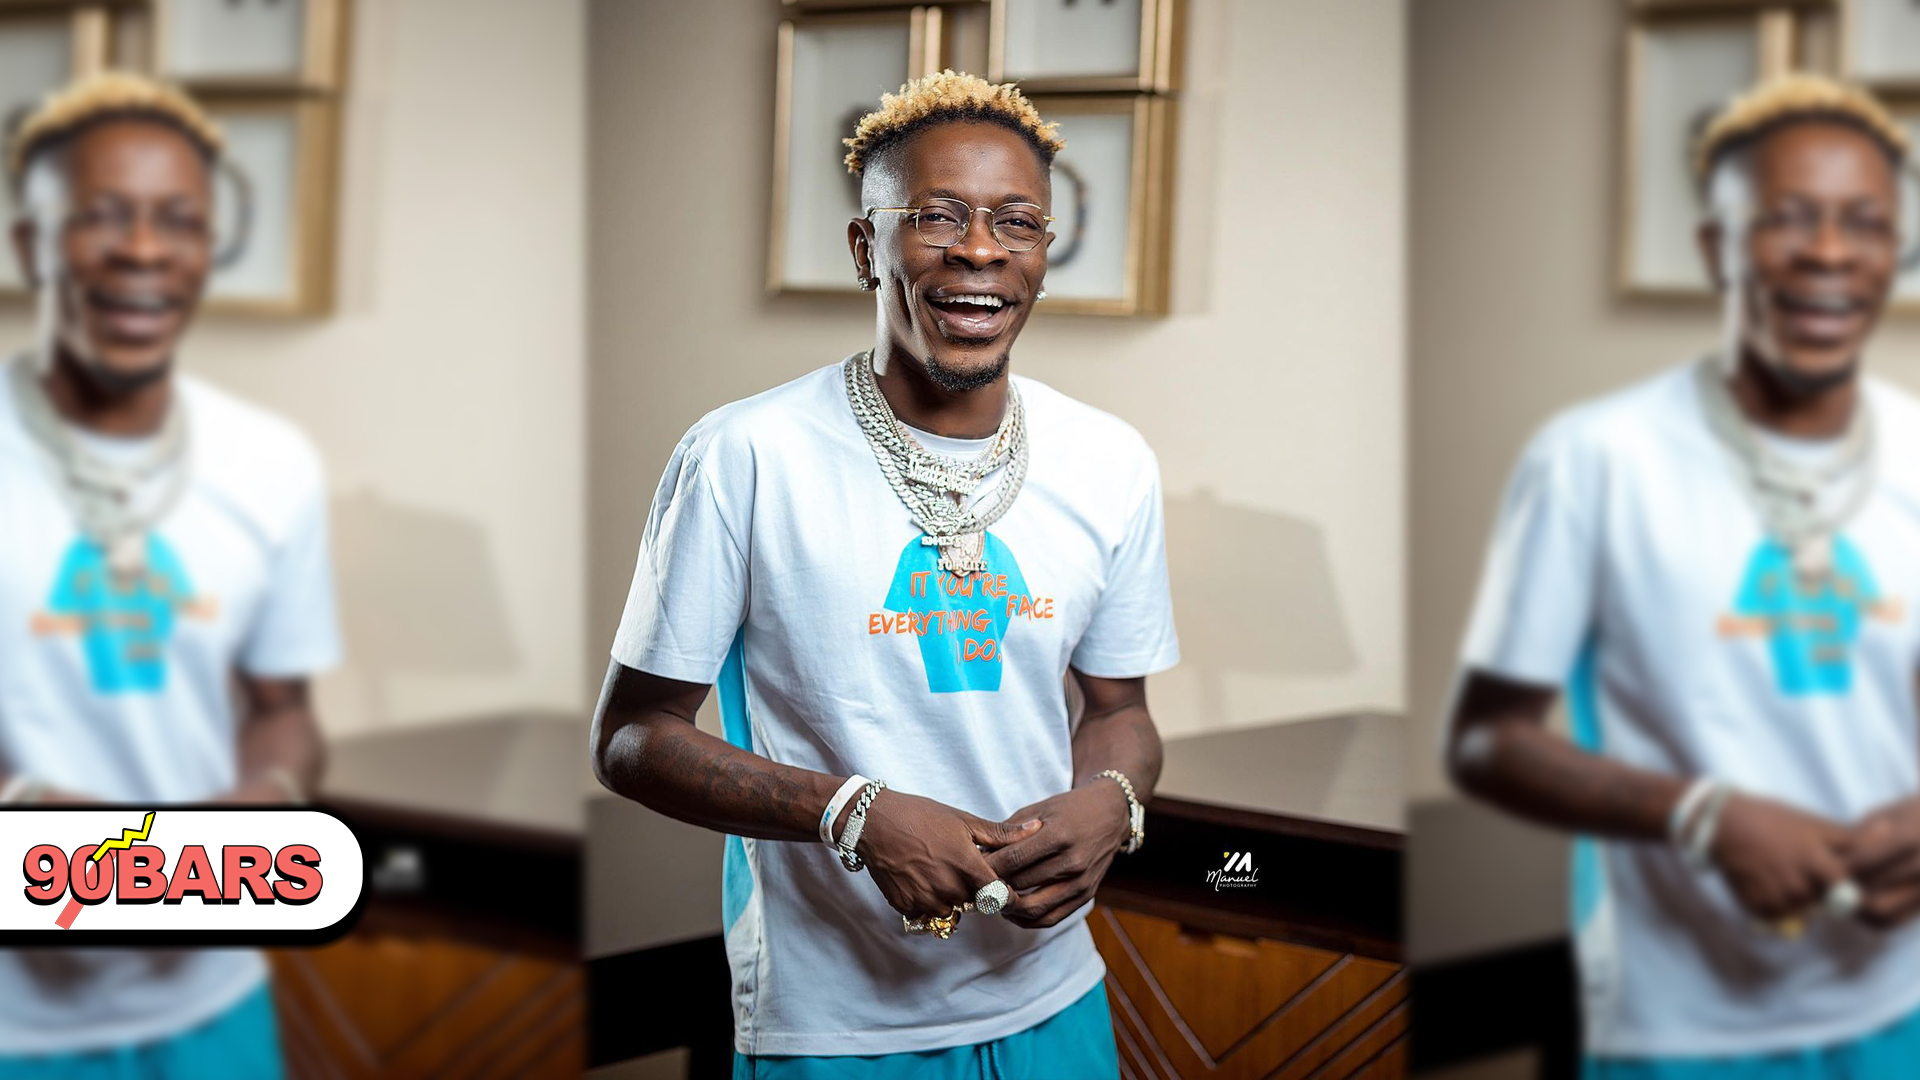 The VGMA Board needs to get in touch with me politely about nominating my work | Shatta Wale.